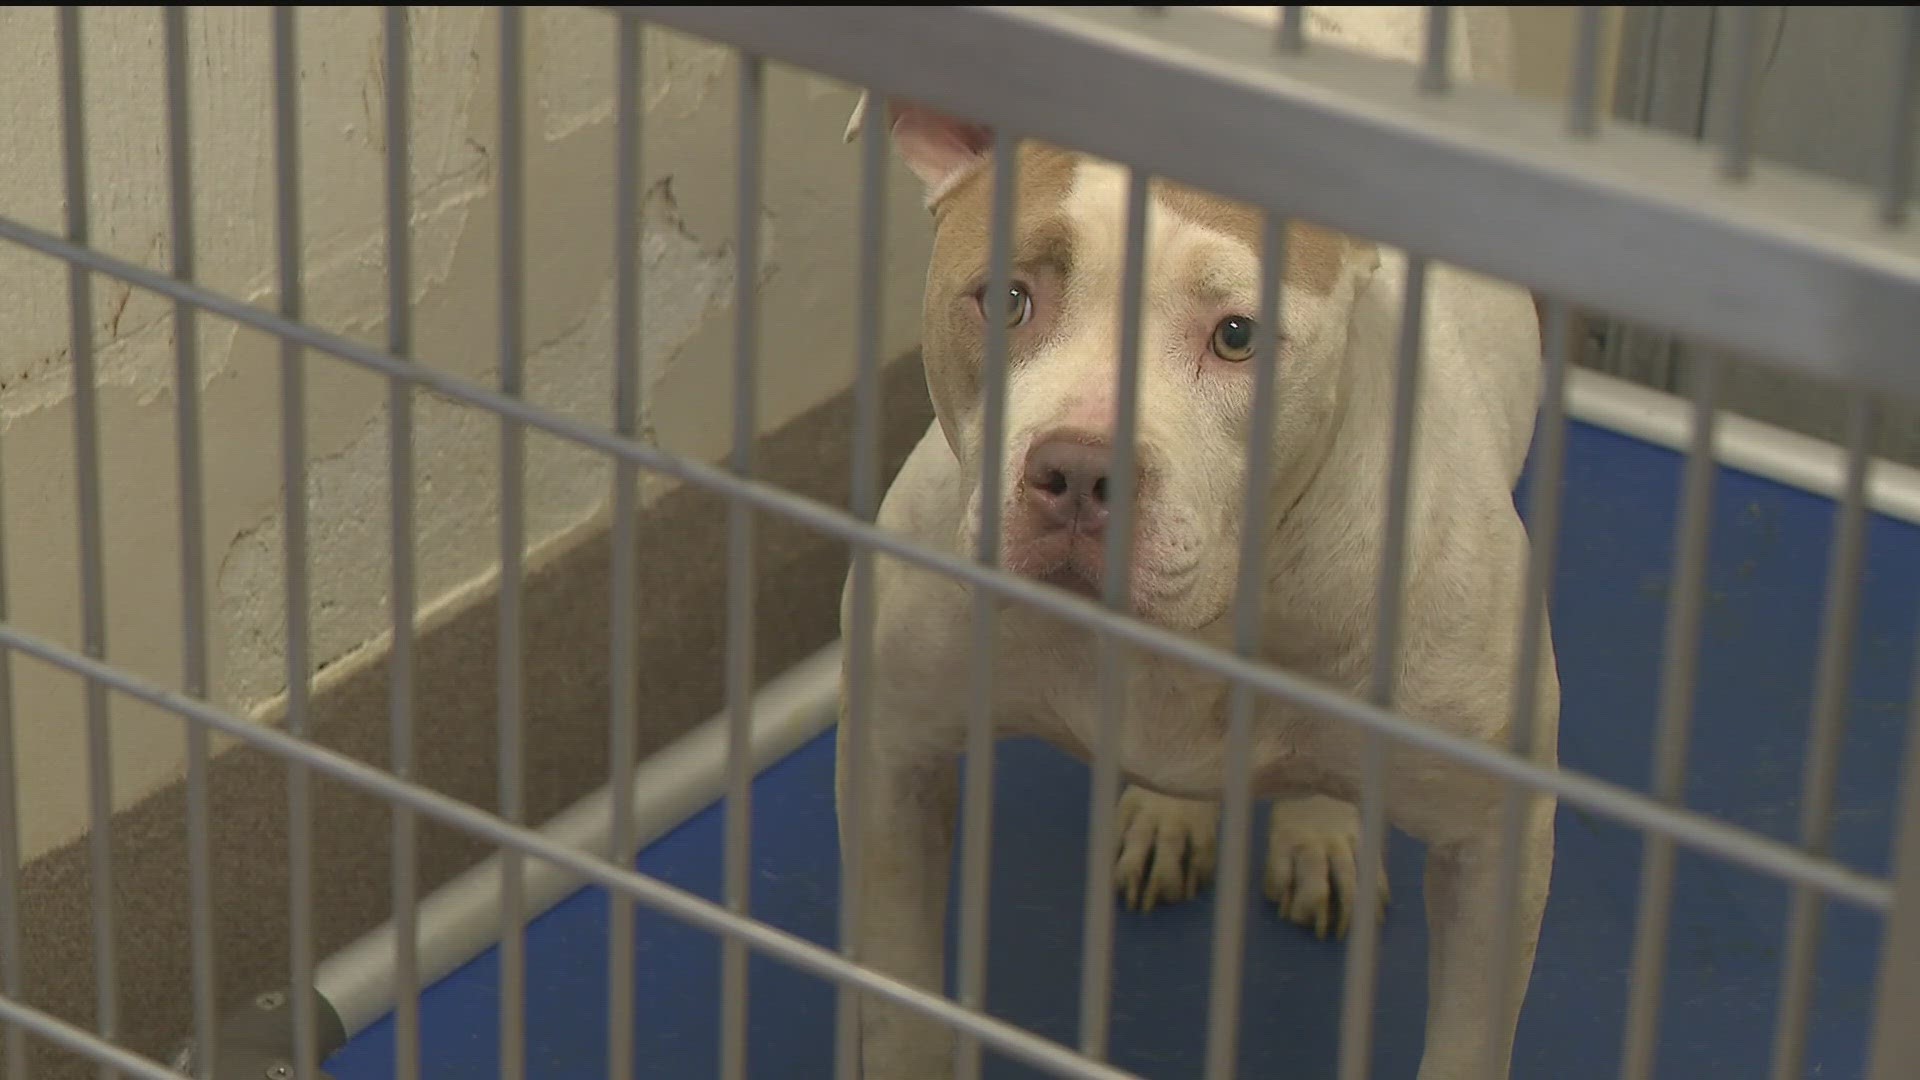 Hundreds of dogs are being held for months in animal cruelty cases, stuck in the shelter and barred from finding a loving family while their owners face charges.